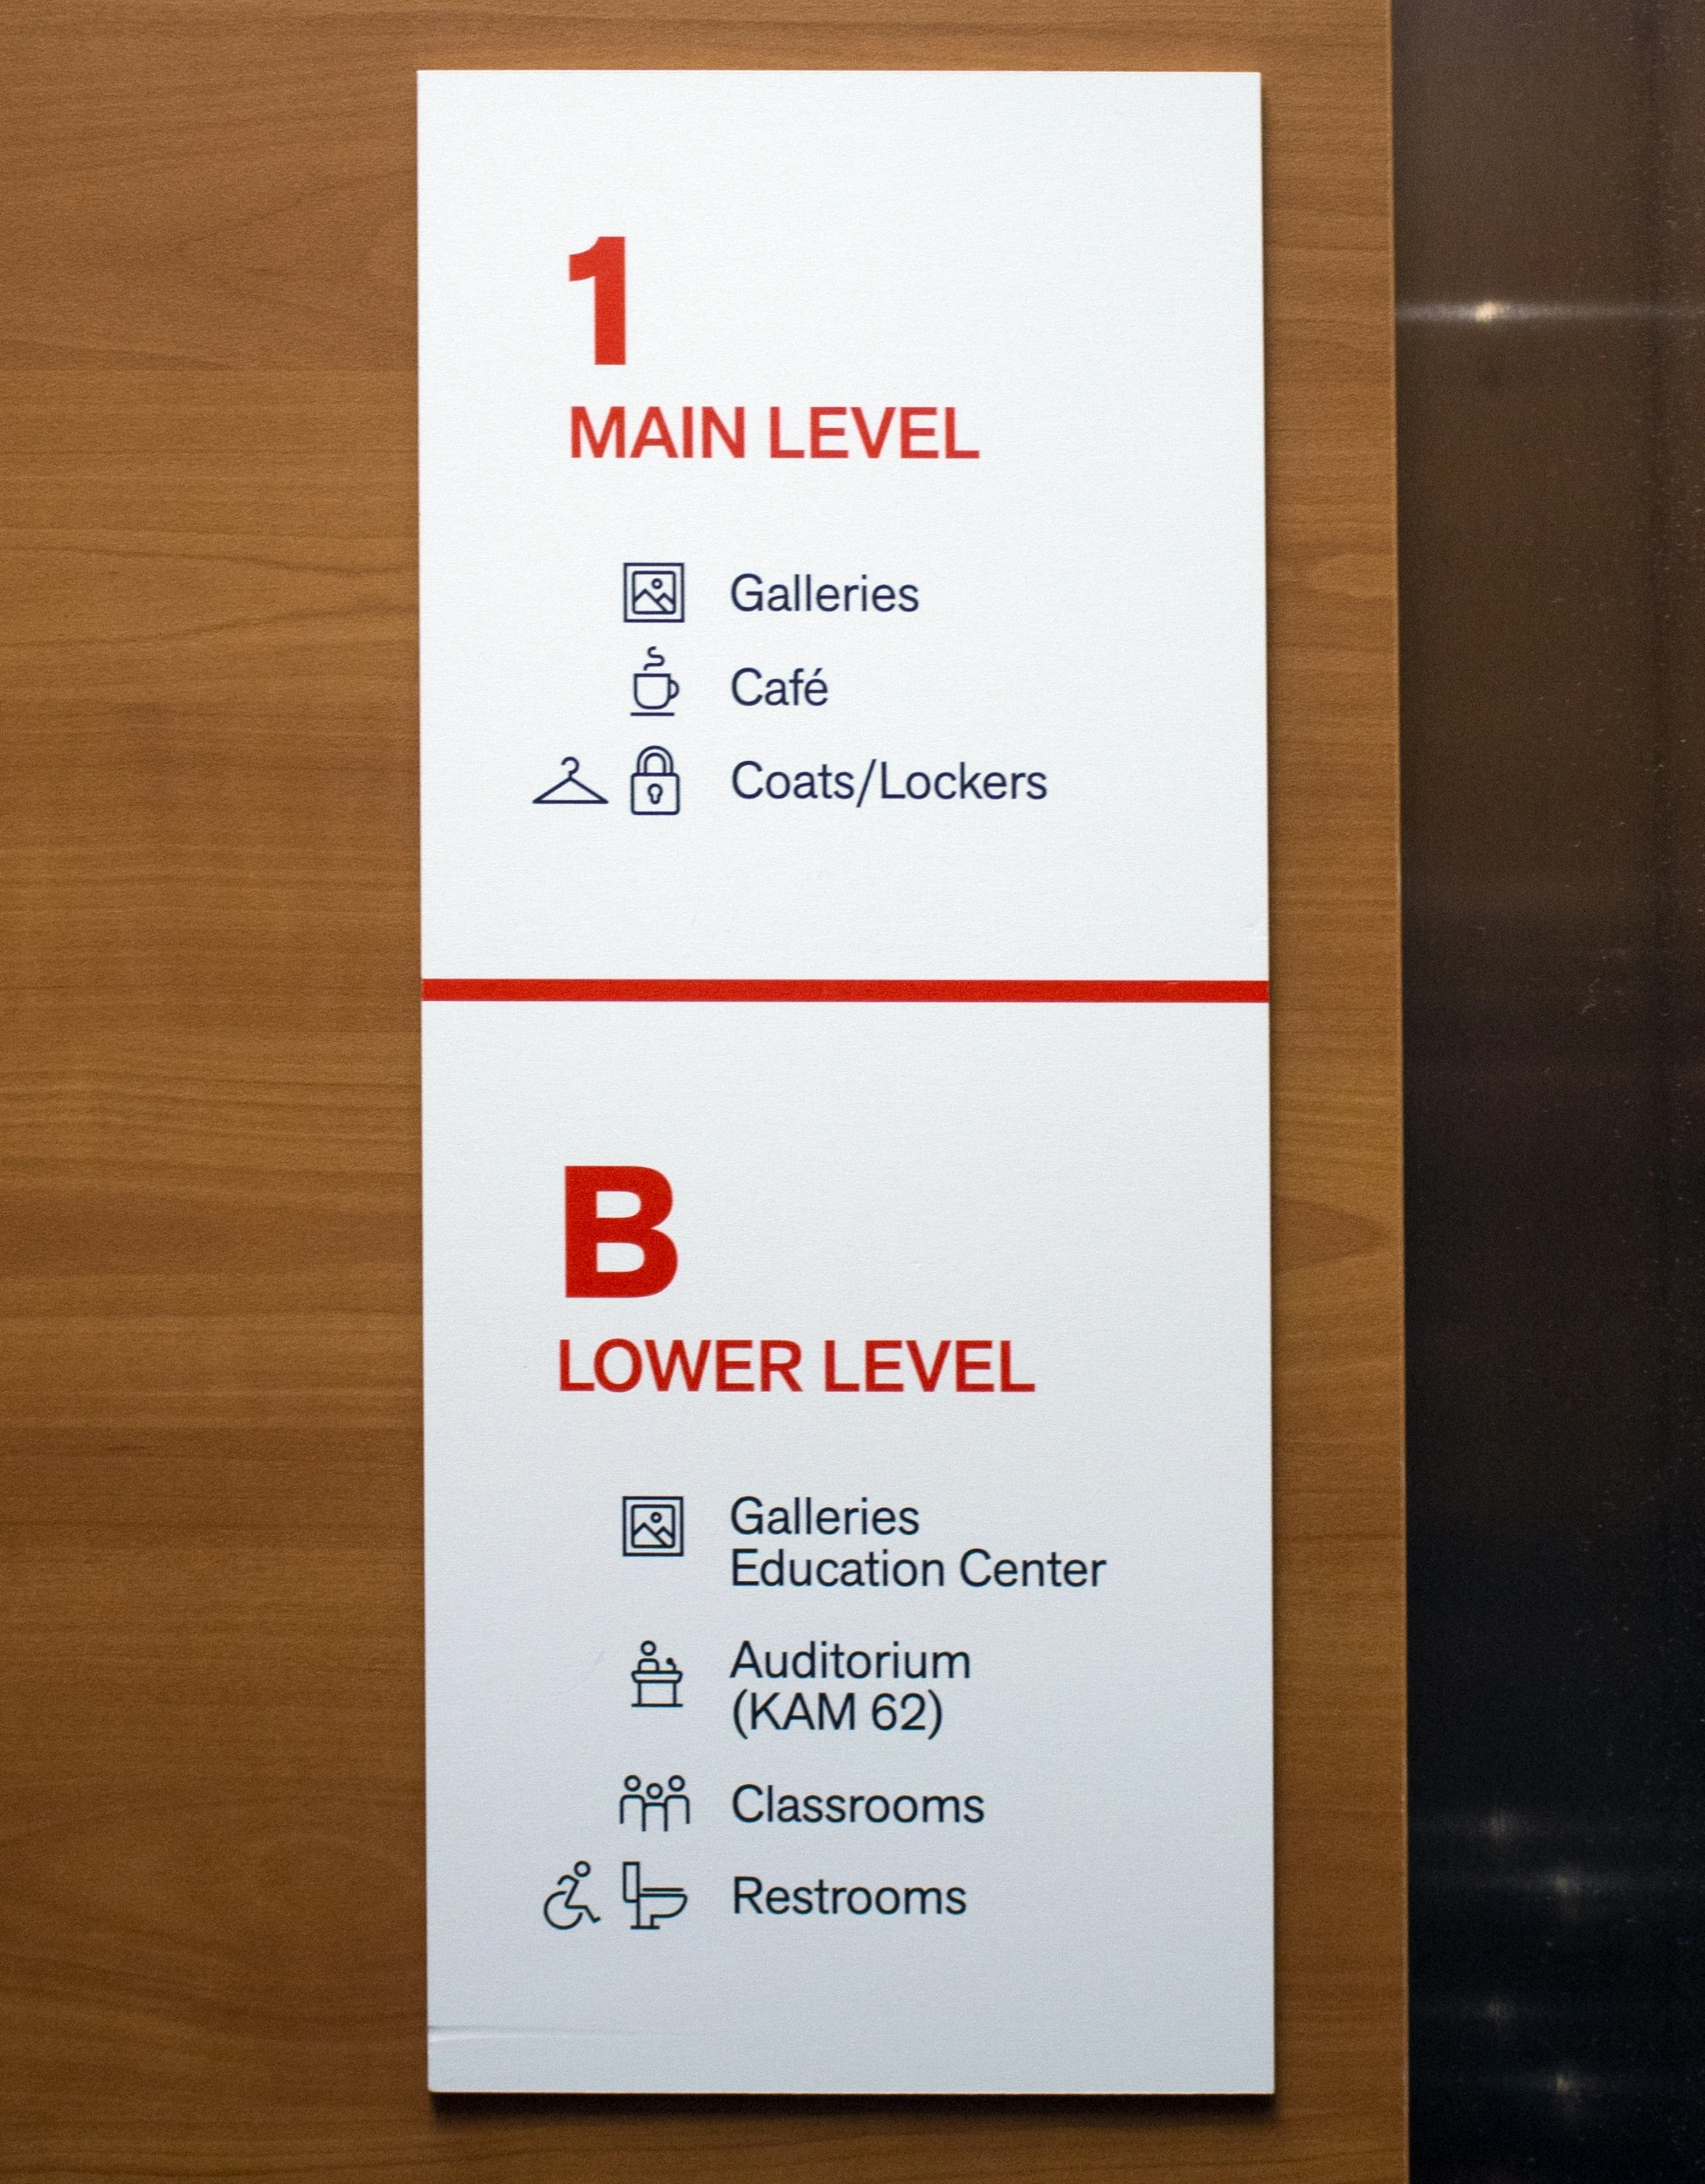 A sign showing the main level and lower level of an elevator.